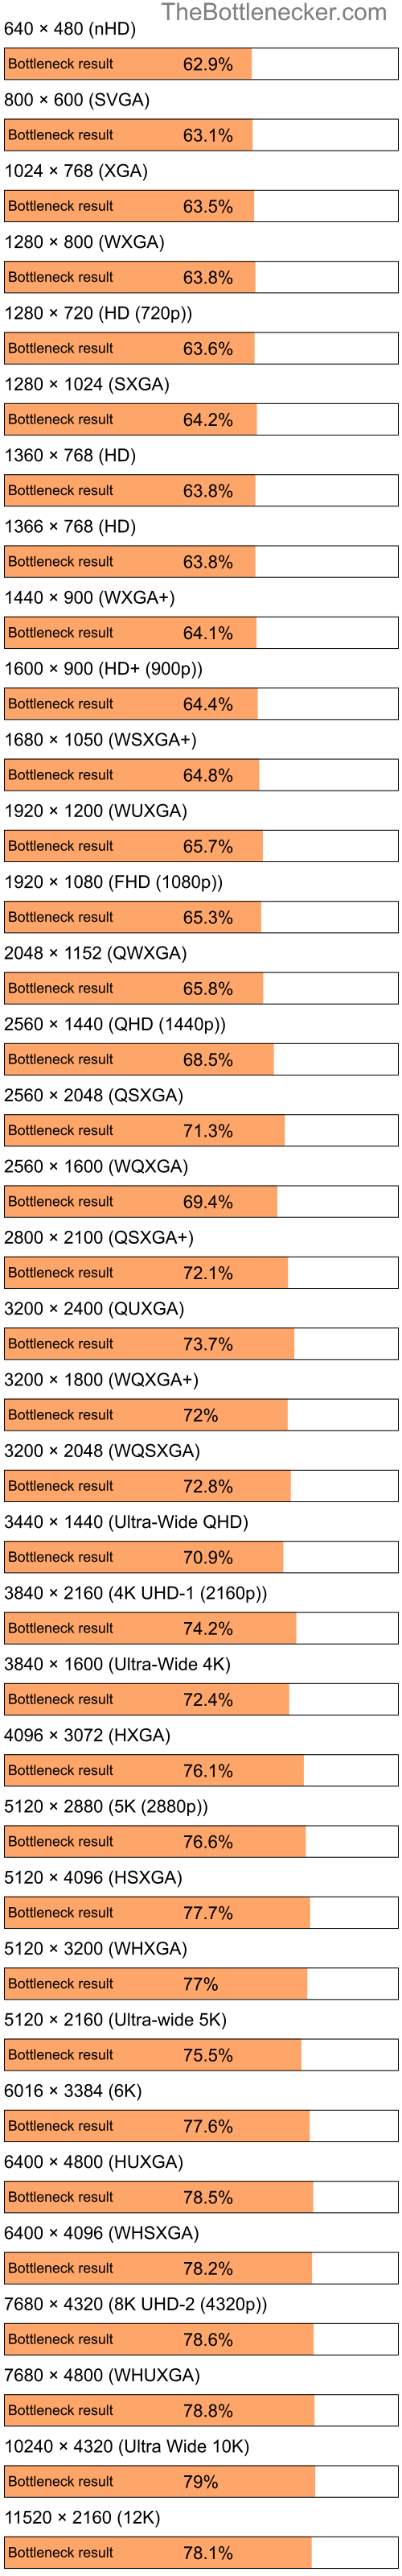 Bottleneck results by resolution for Intel Celeron M 420 and AMD Mobility Radeon HD 3430 in General Tasks